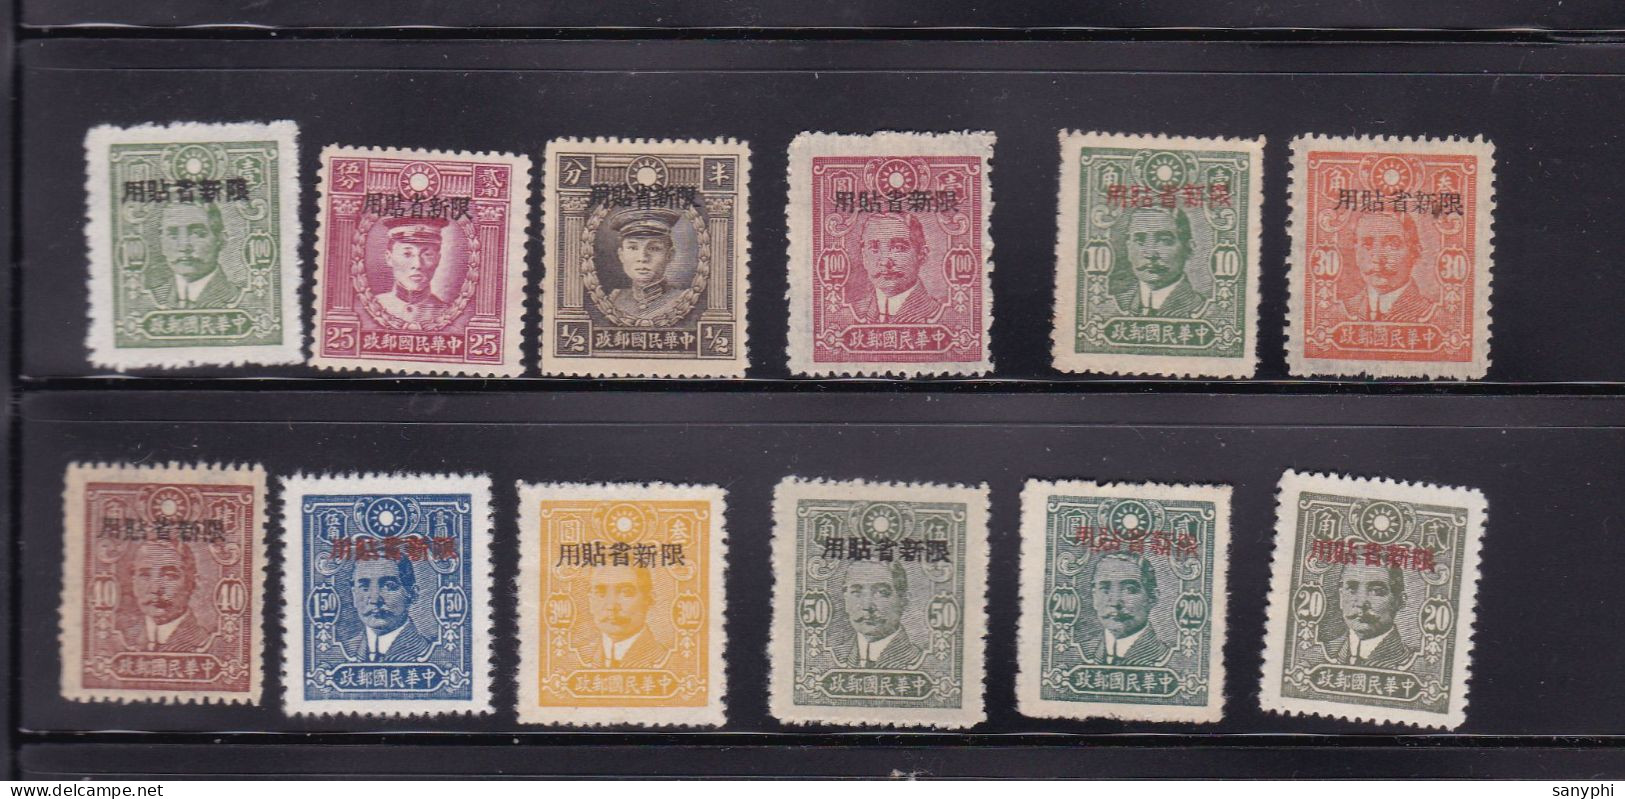 RO China Chine Various Dr Sun Ovpt Sinkiang Diffs 12 Stamps ML - 1912-1949 Republic